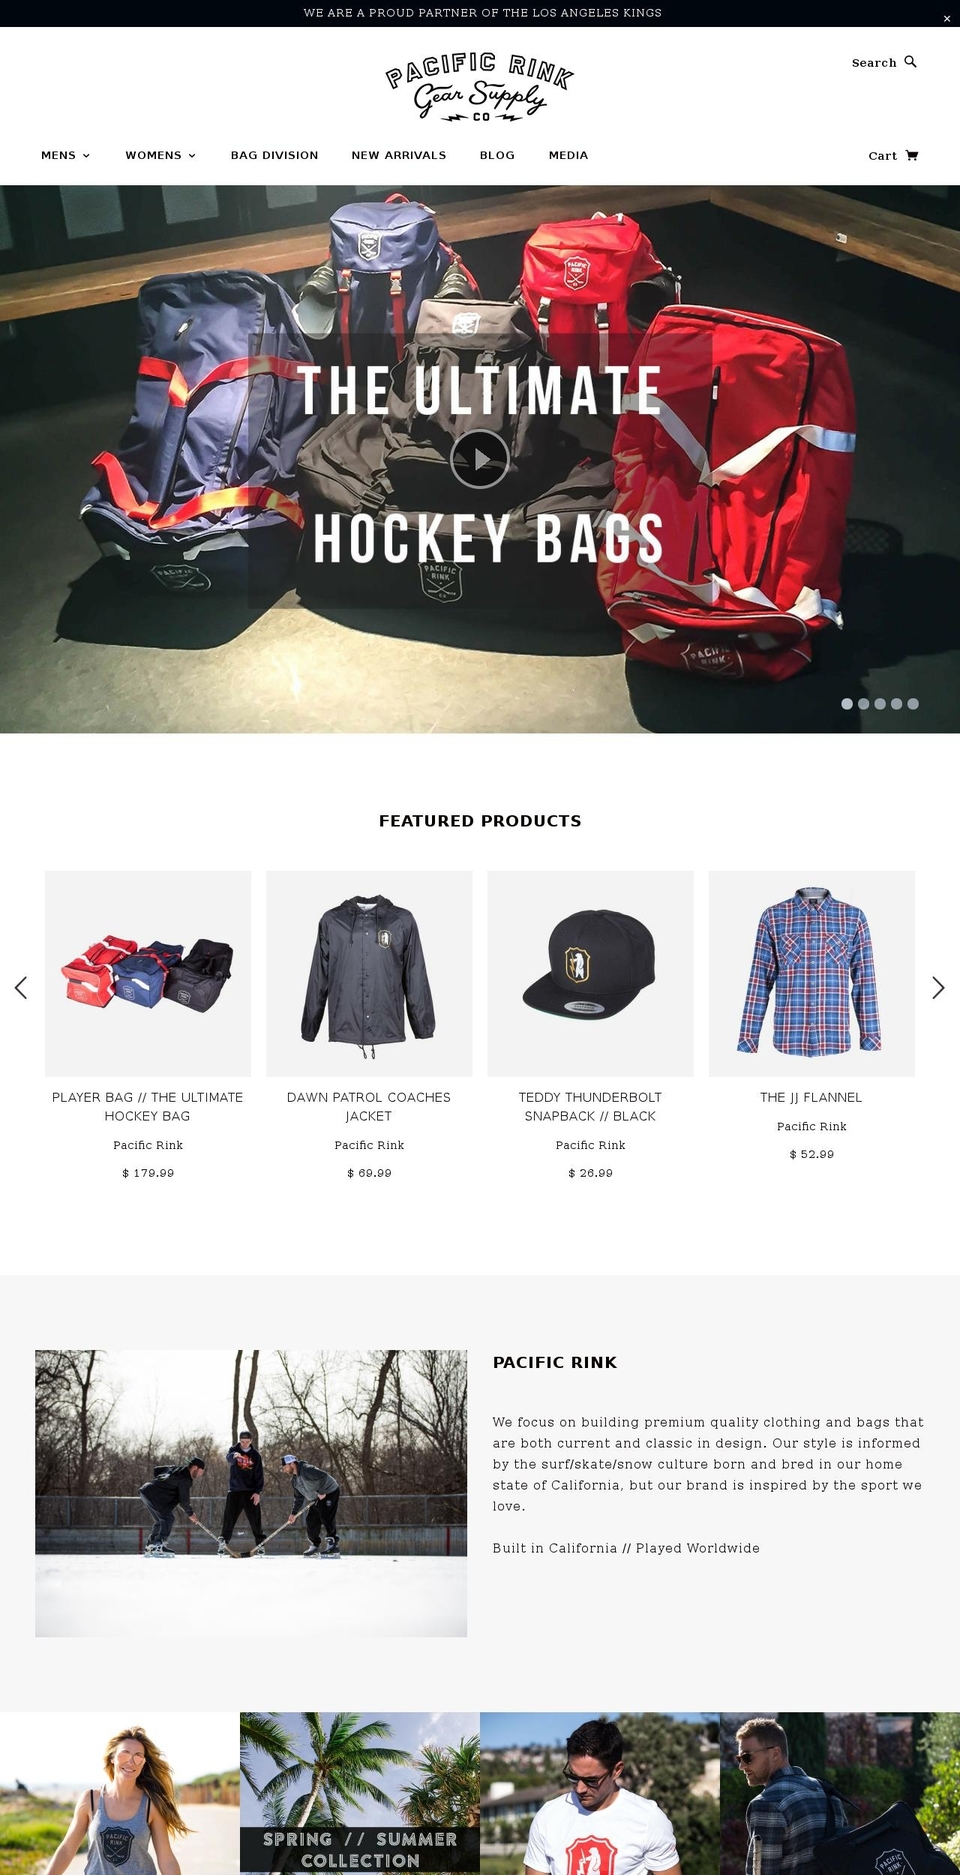 District Shopify theme site example pacificrink.com